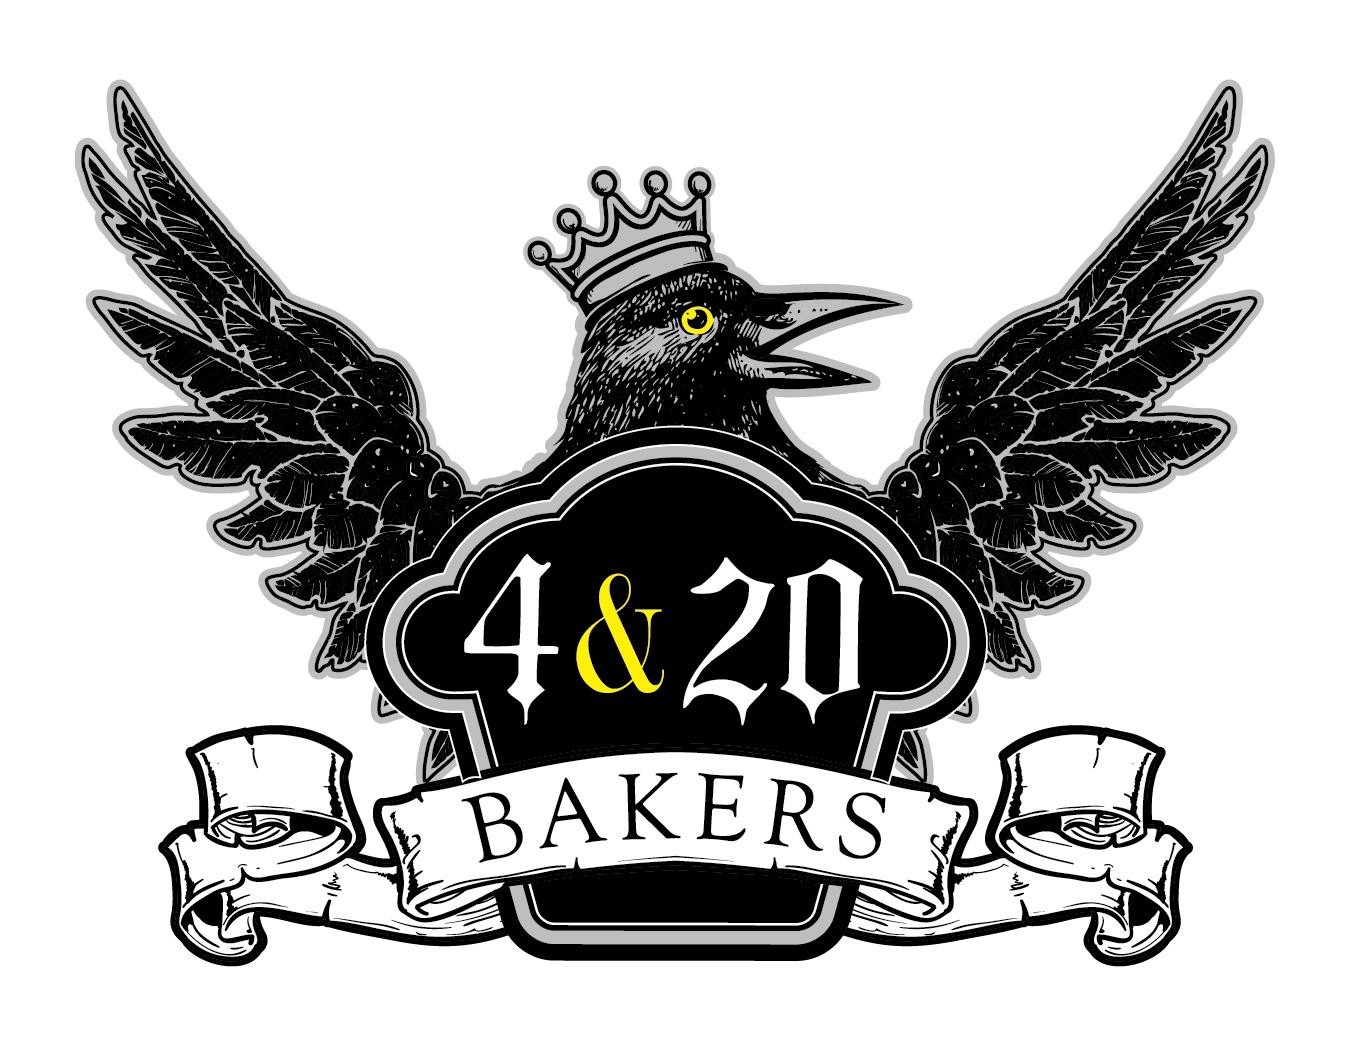 4&20 Bakers Bakery Cafe 307B Mims Road